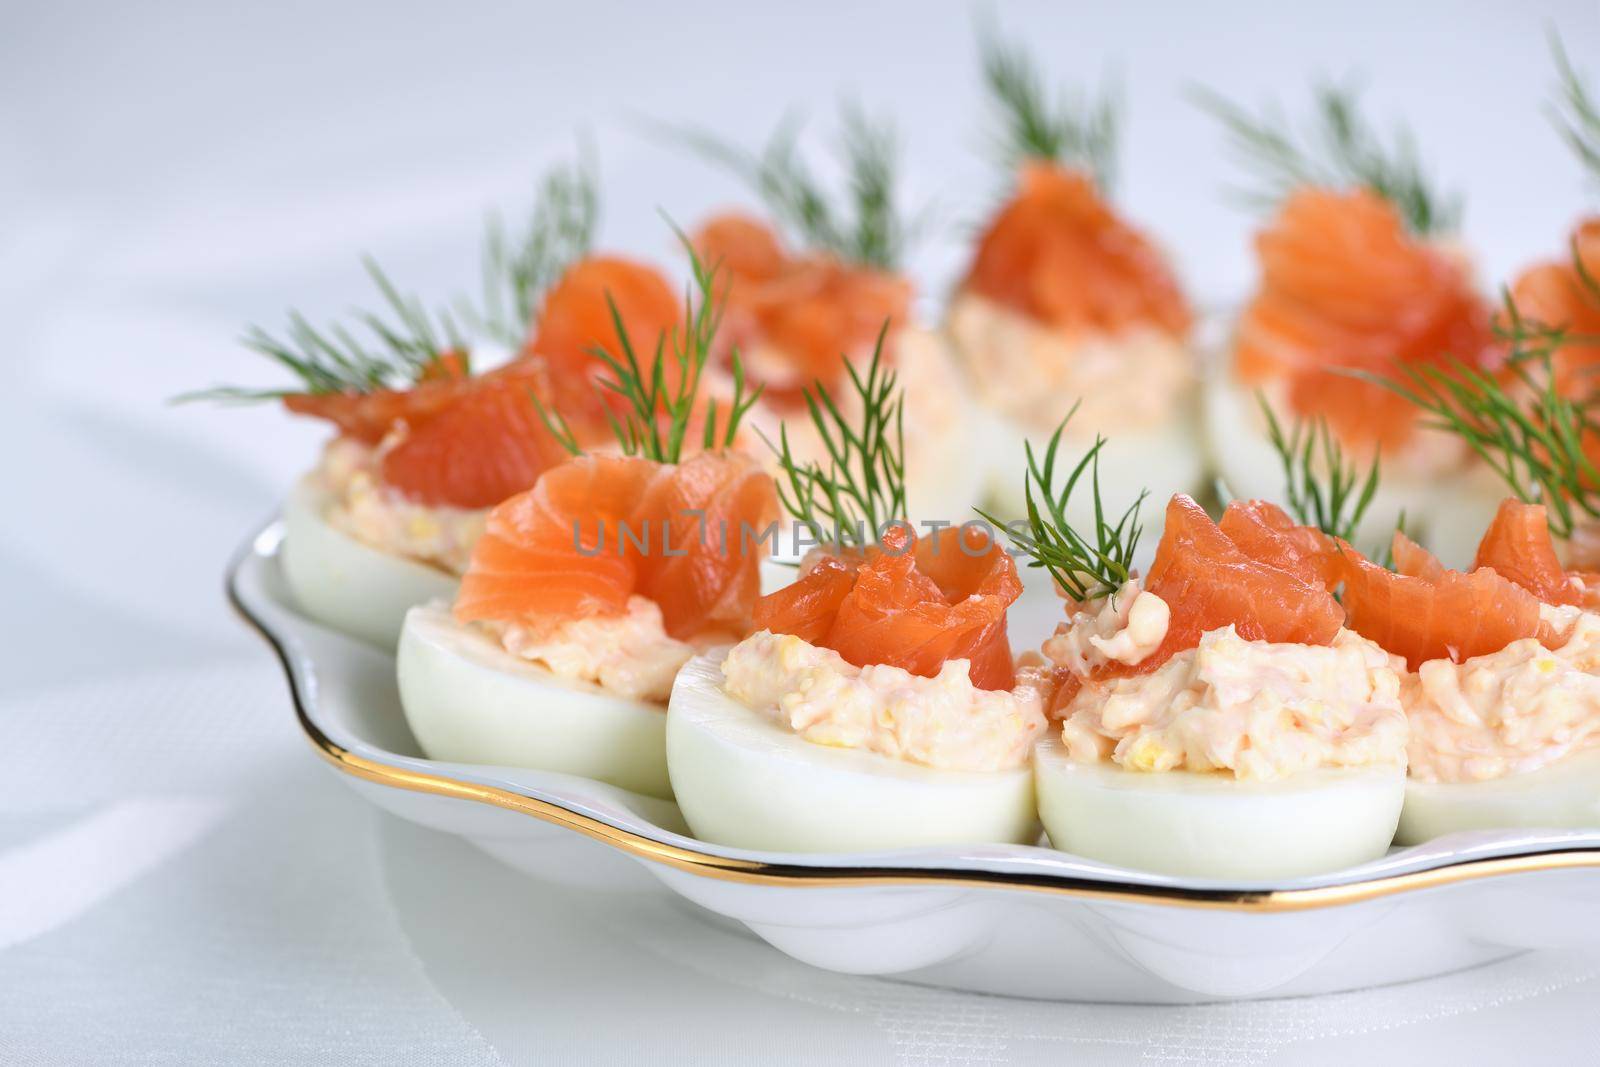 Eggs stuffed with salmon by Apolonia